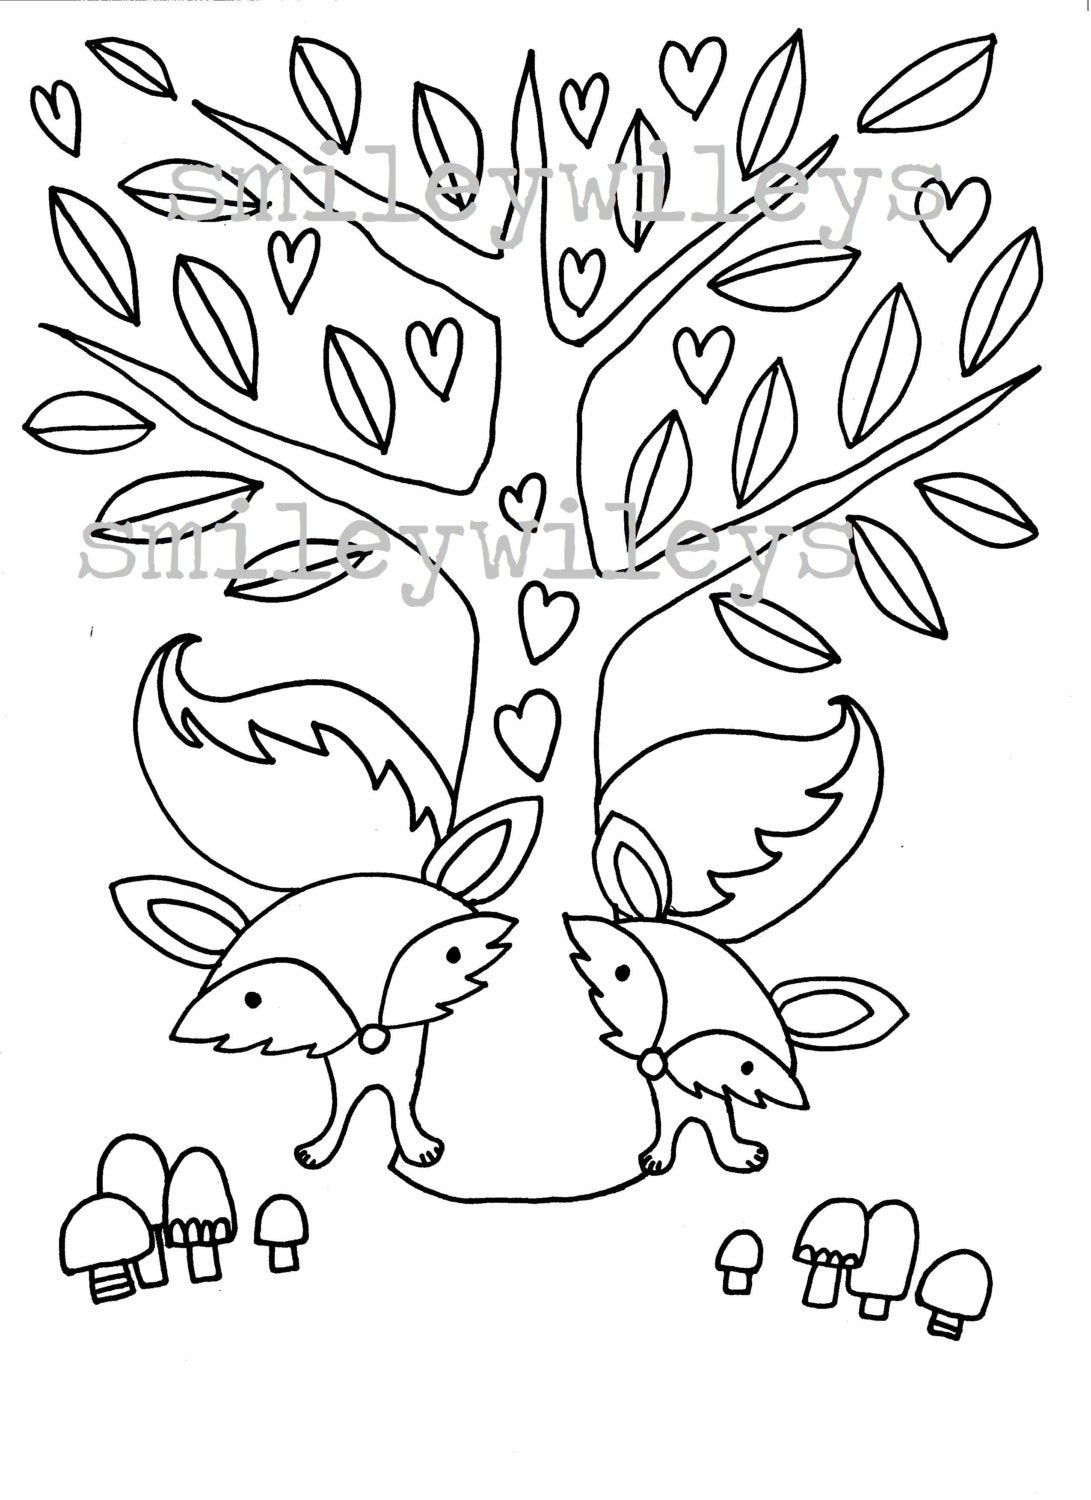 Fox Coloring Pages For Kids
 Animal Colouring Pages Fox and Bunny Colouring by smileywileys